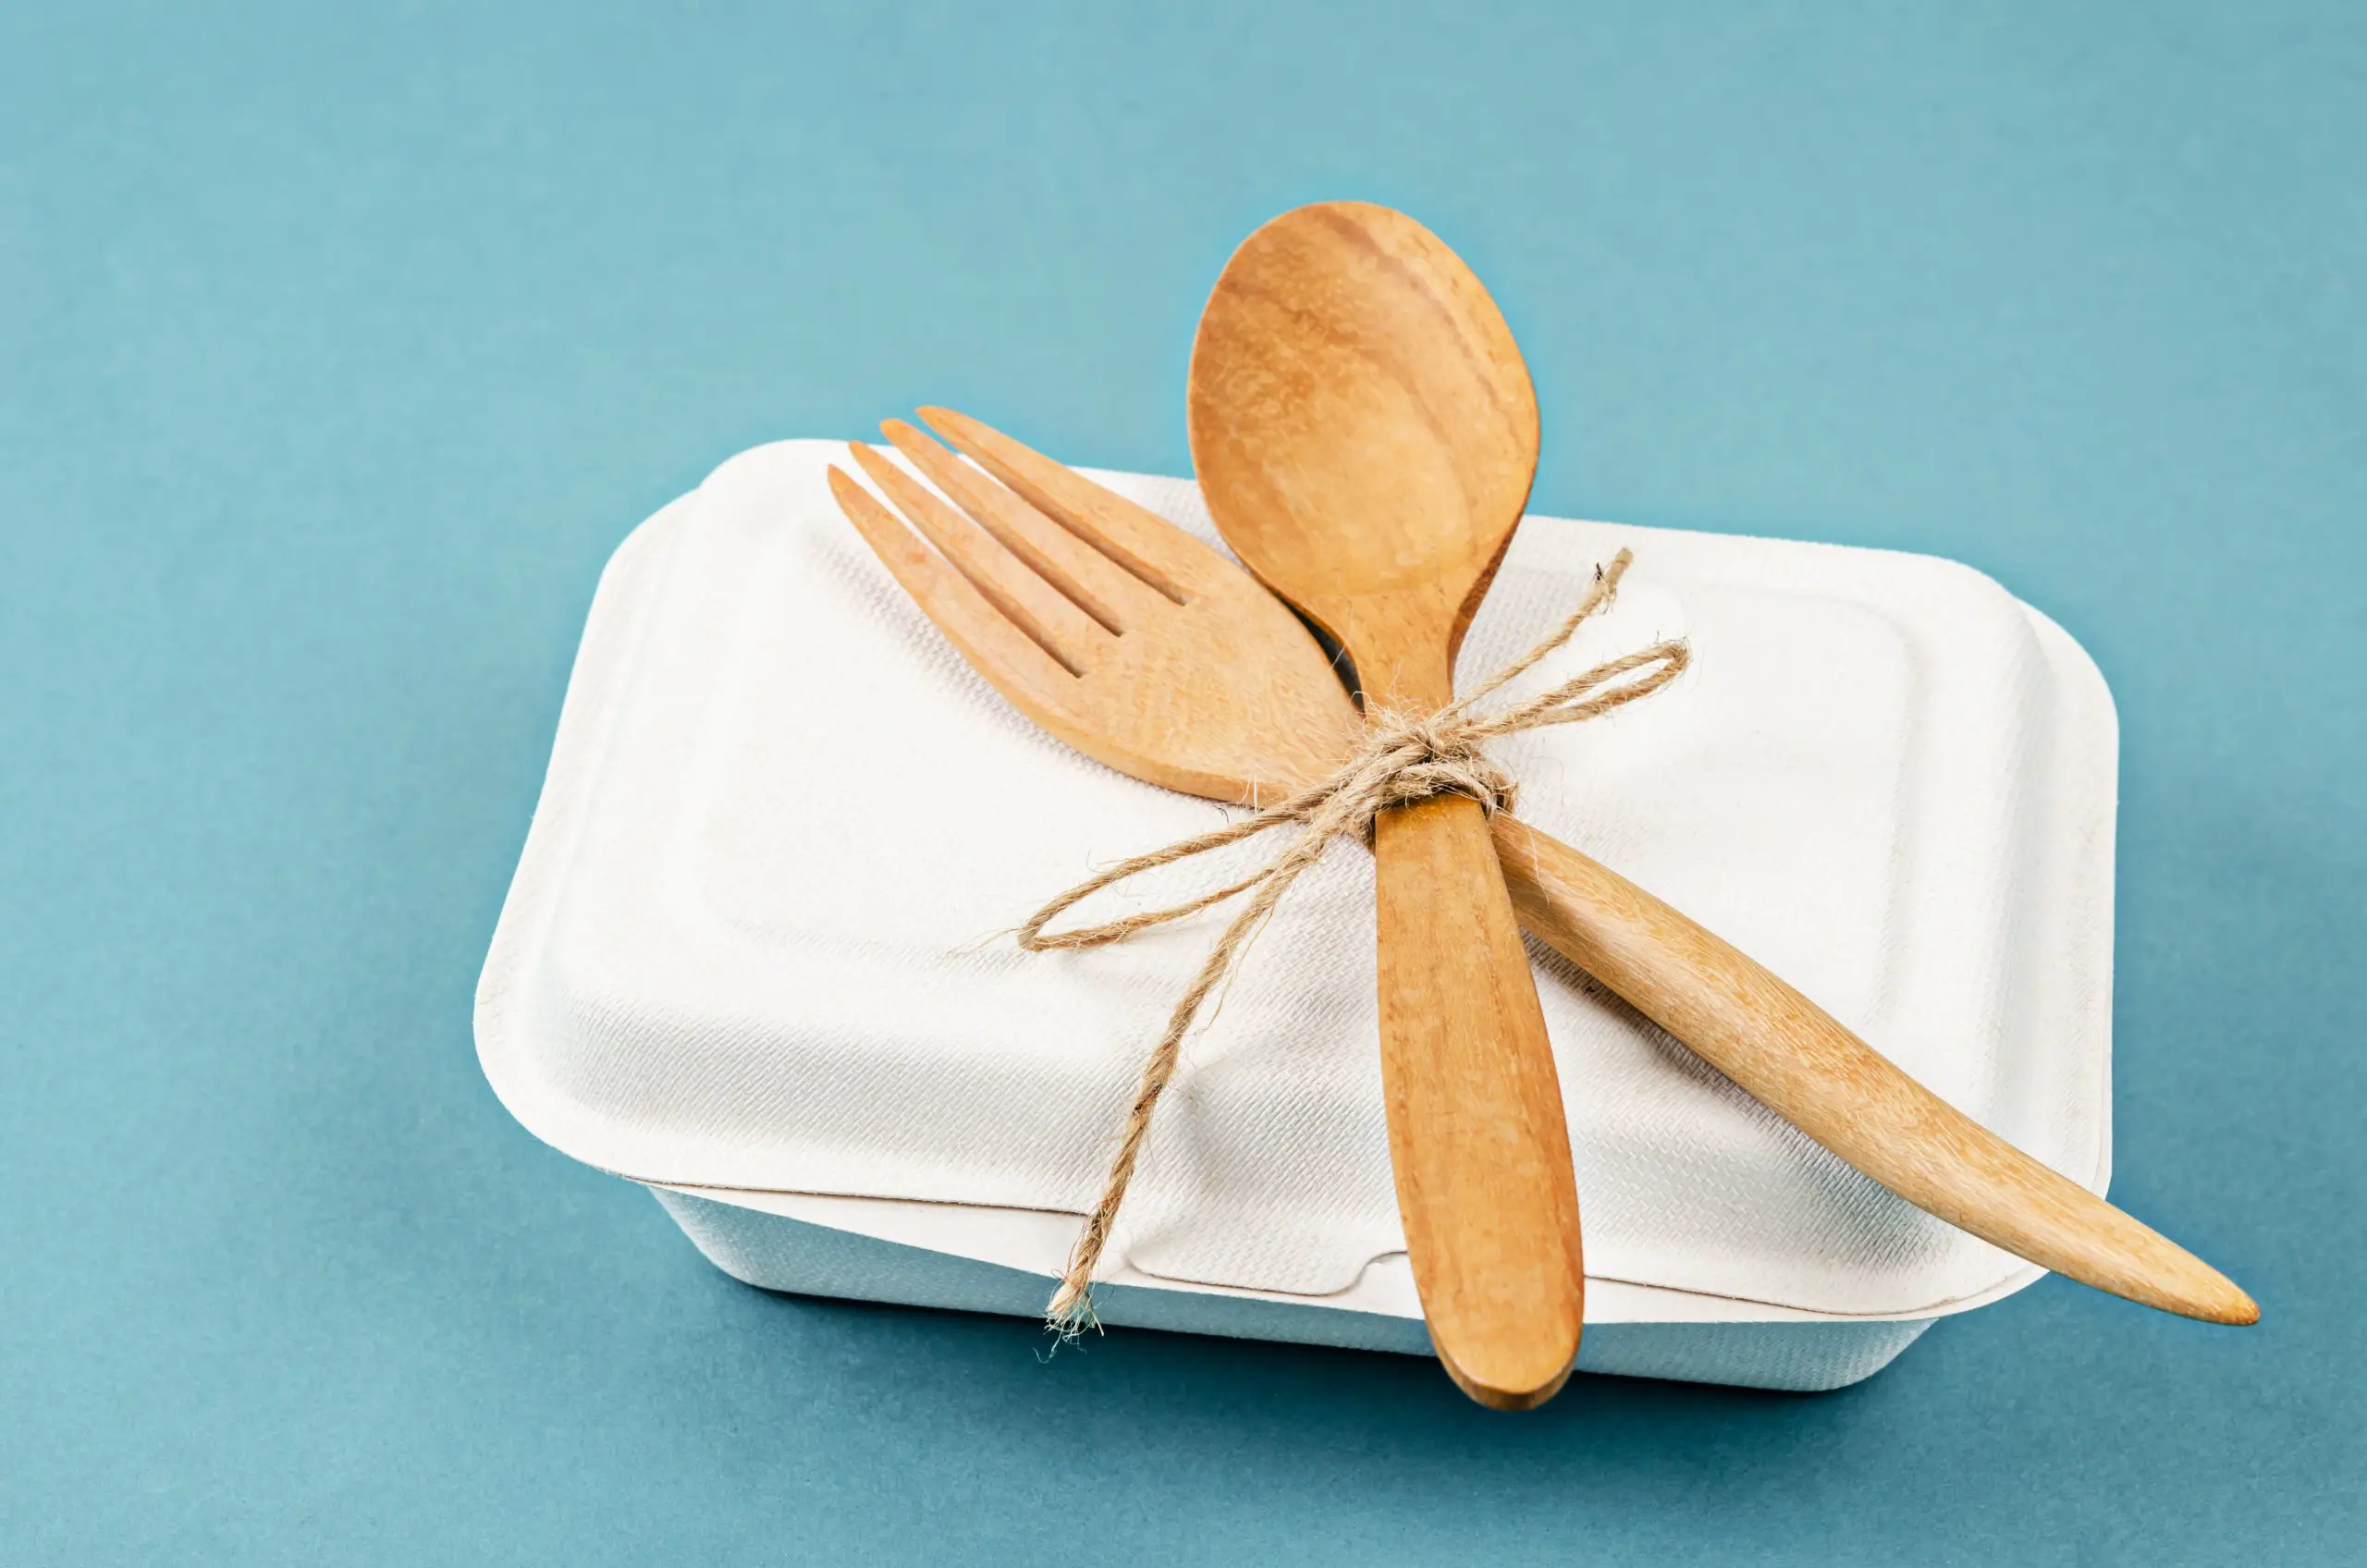 Biodegradable food box with wooden spoon